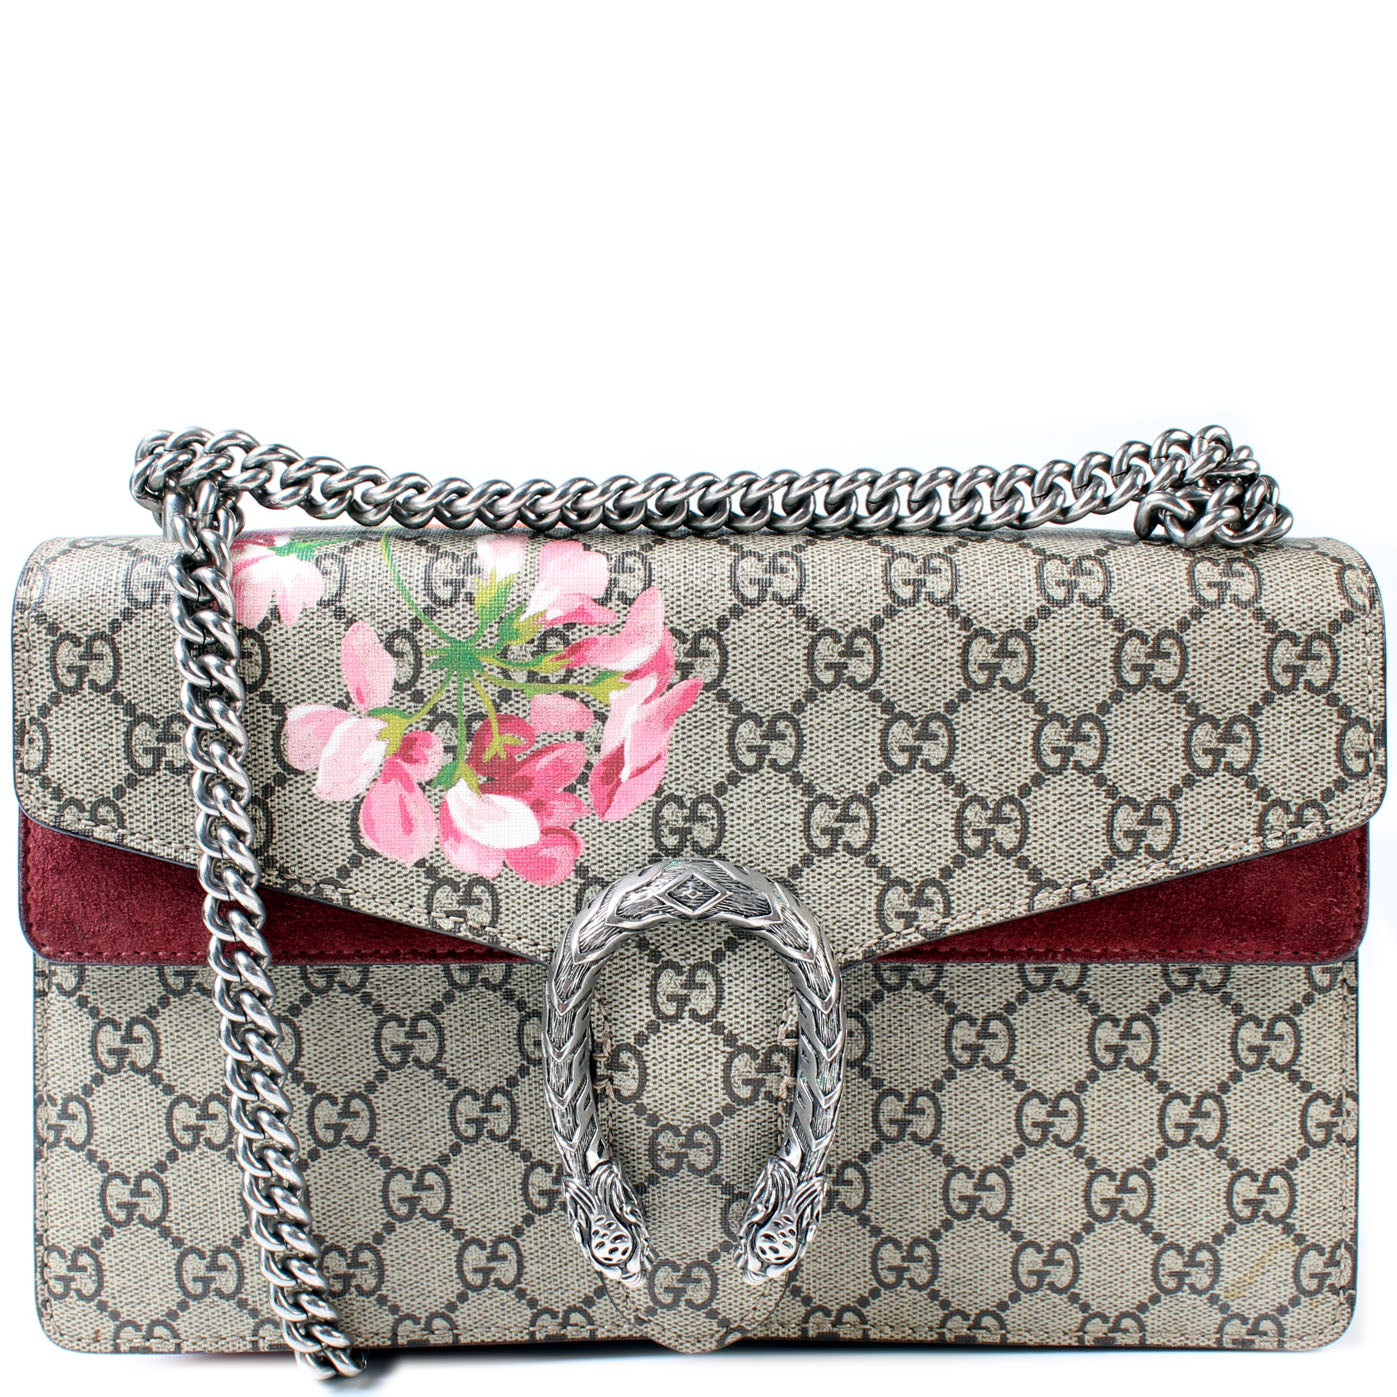 Authentic Gucci Dionysus small GG Blooms shoulder bag for Sale in